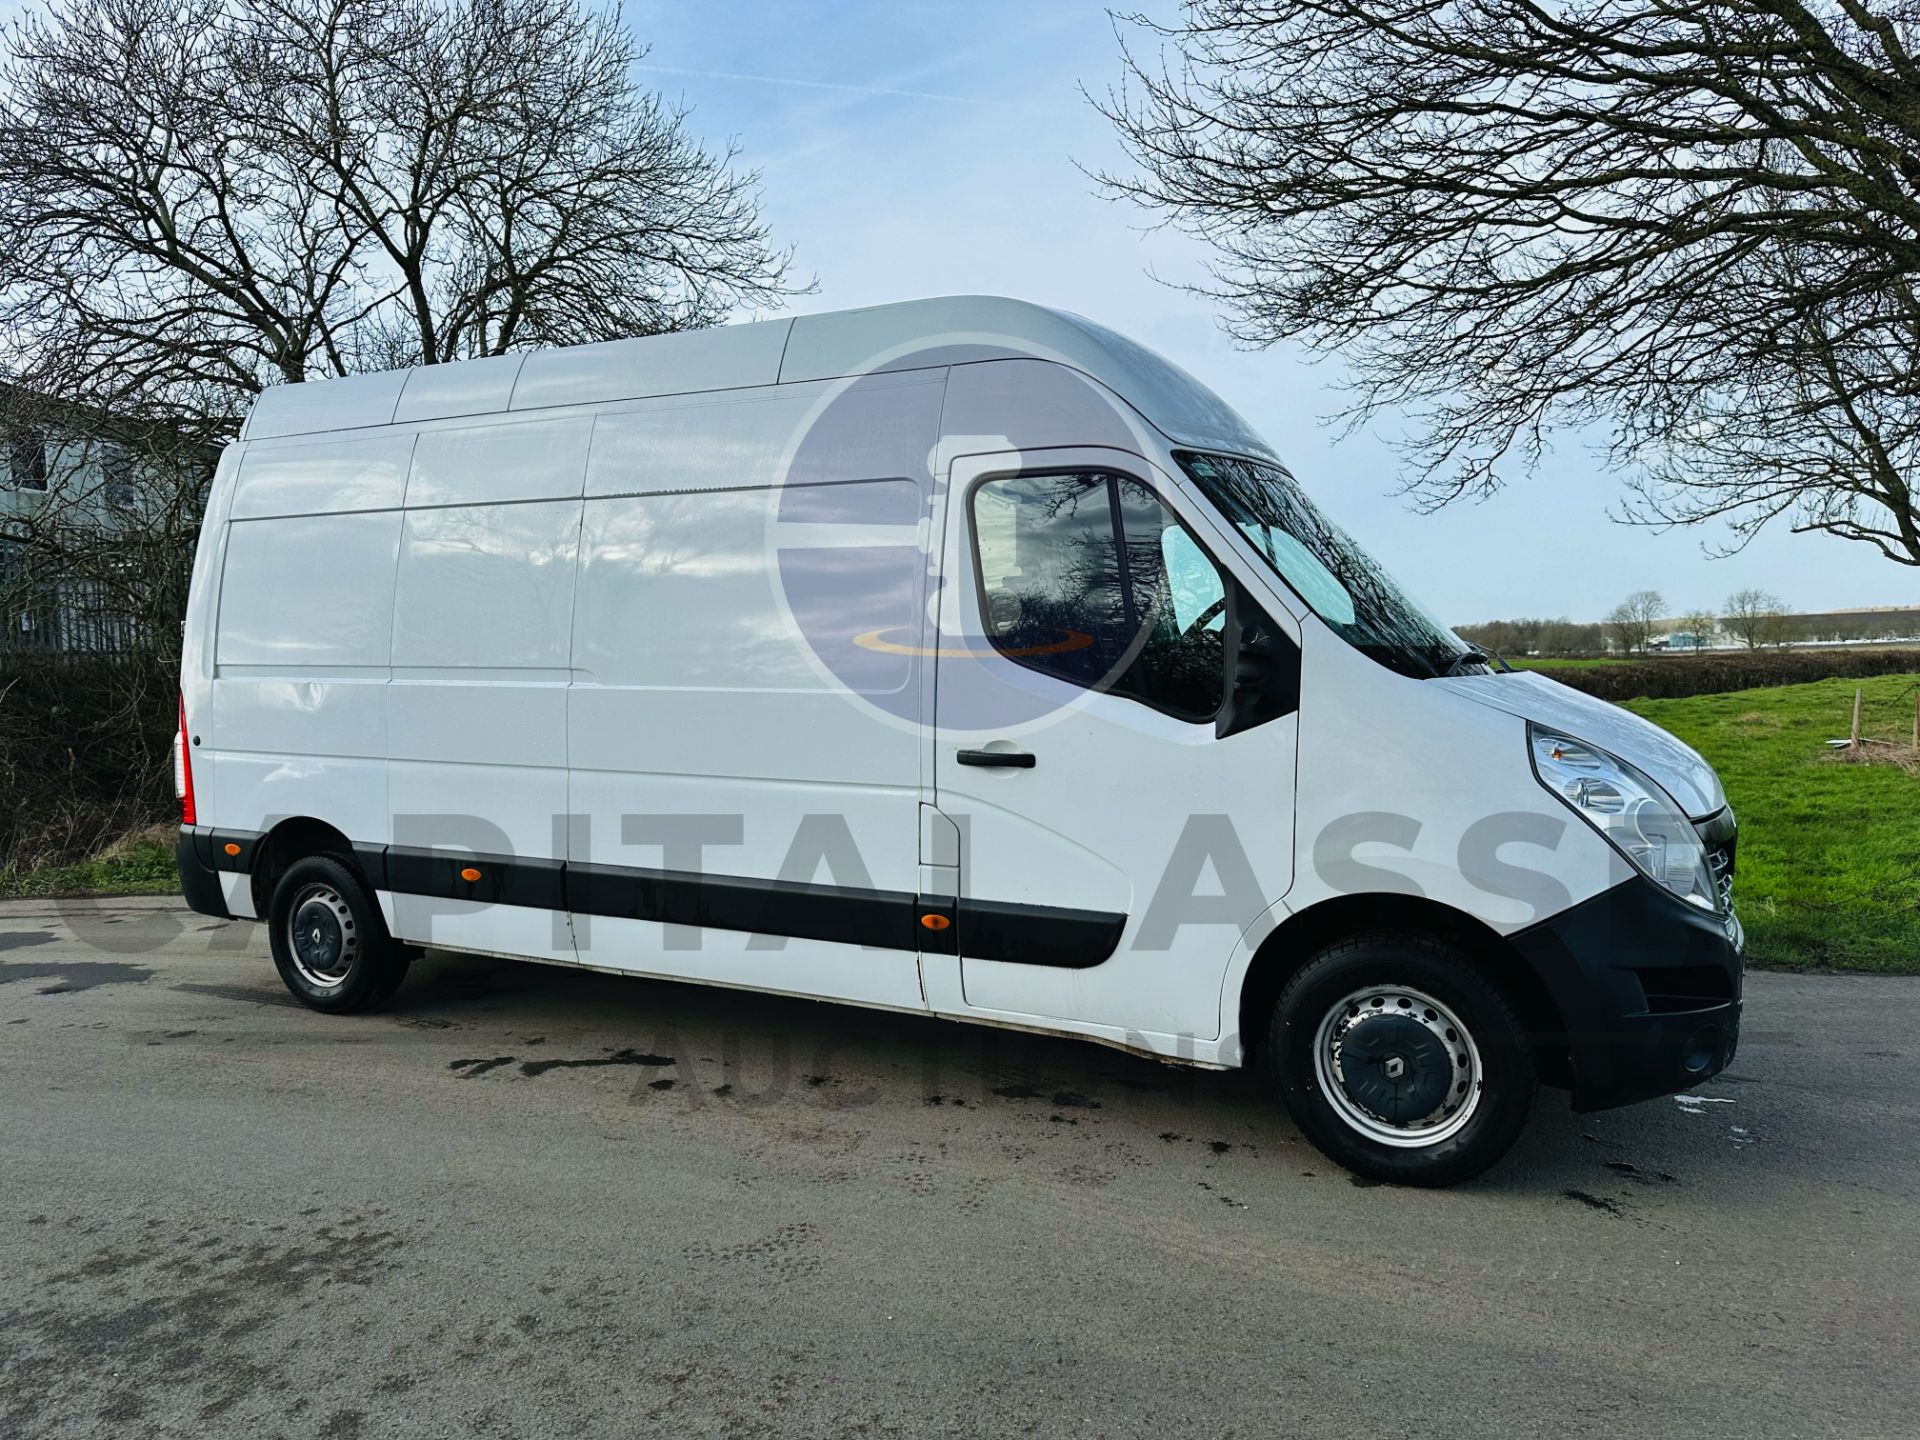 (On Sale) RENAULT MASTER *BUSINESS ENERGY* LWB EXTRA HI-ROOF (2019 - EURO 6) 2.3 DCI - 145 BHP